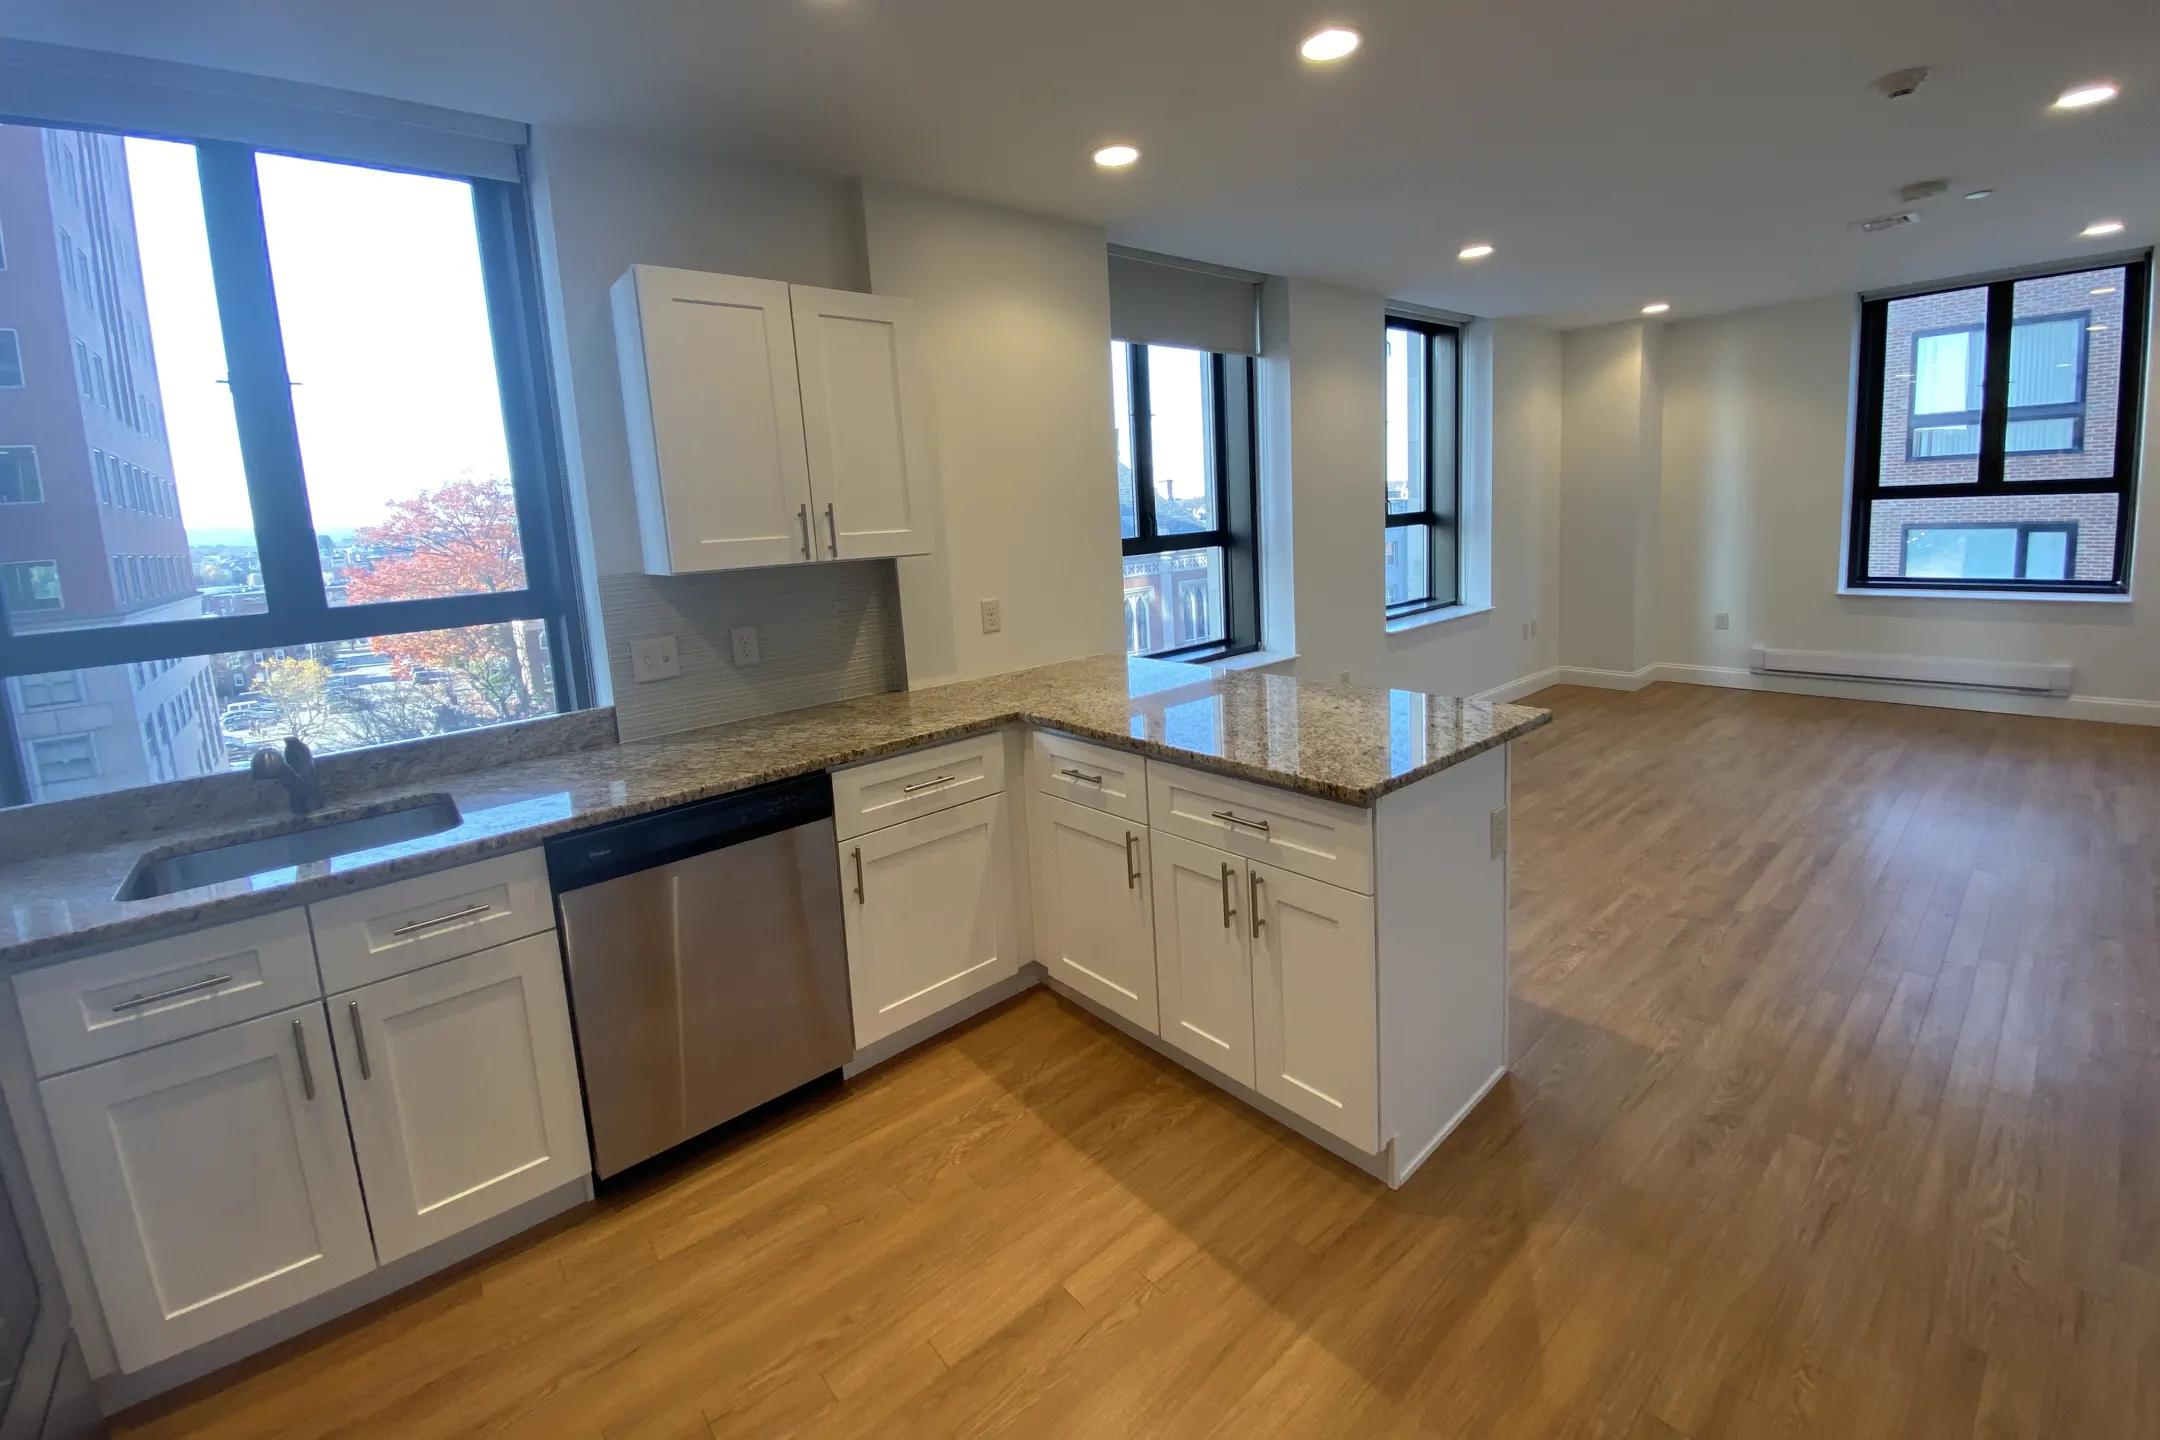 Kitchen - Red Oak at 875 Elm Street Apartments - Manchester, NH